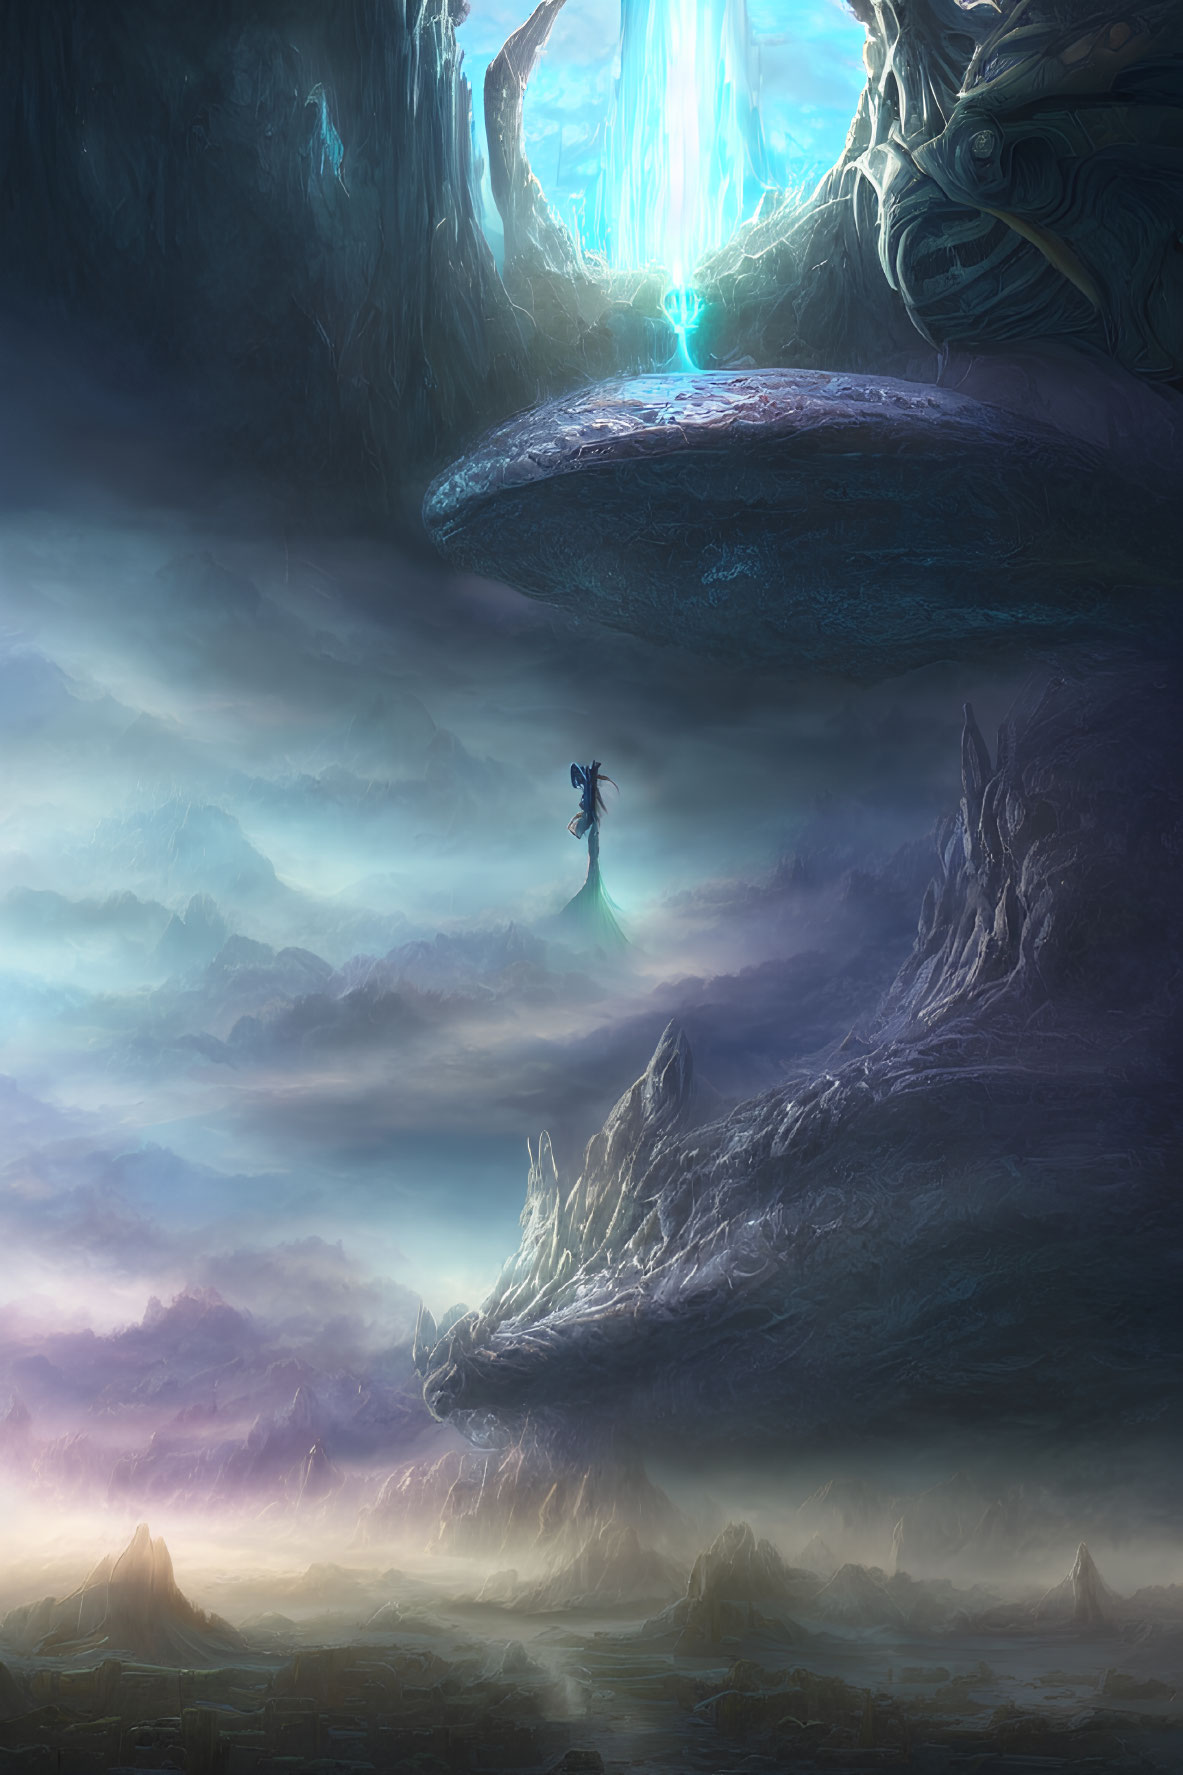 Mystical cave scene with glowing figure and floating rock